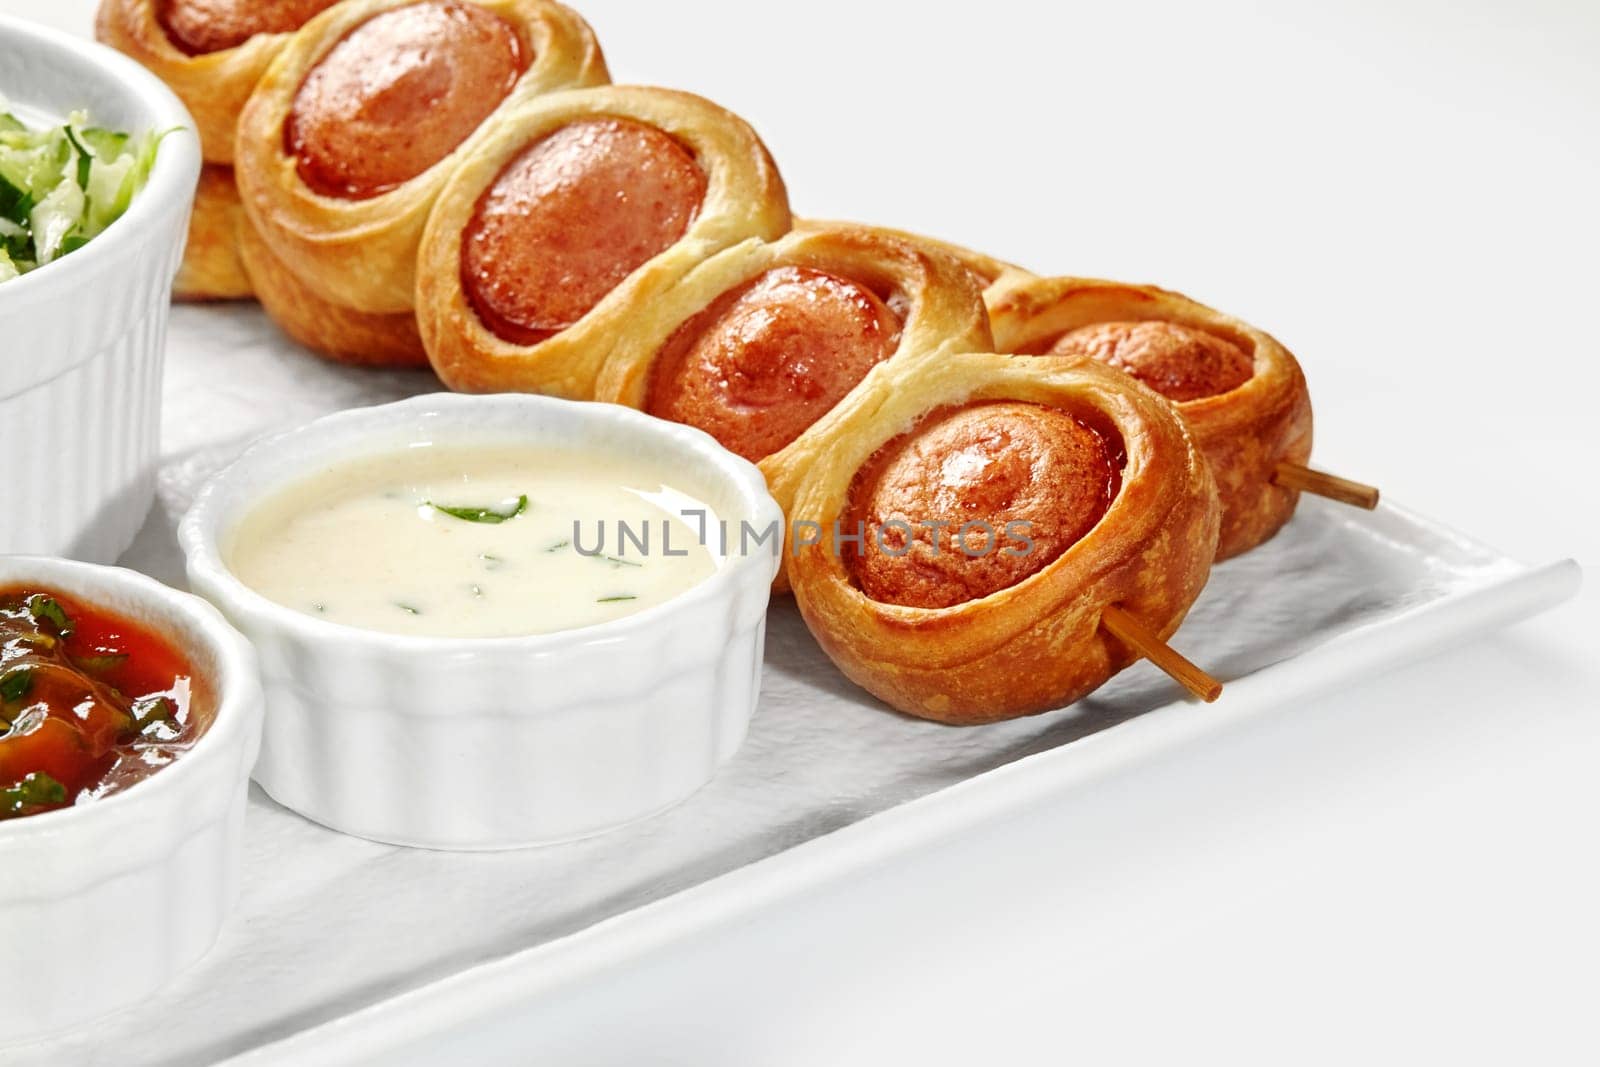 Closeup of appetizing golden brown sausage rolls in brioche on skewers served on plate with vegetable salad and sauces against white background. French style breakfast